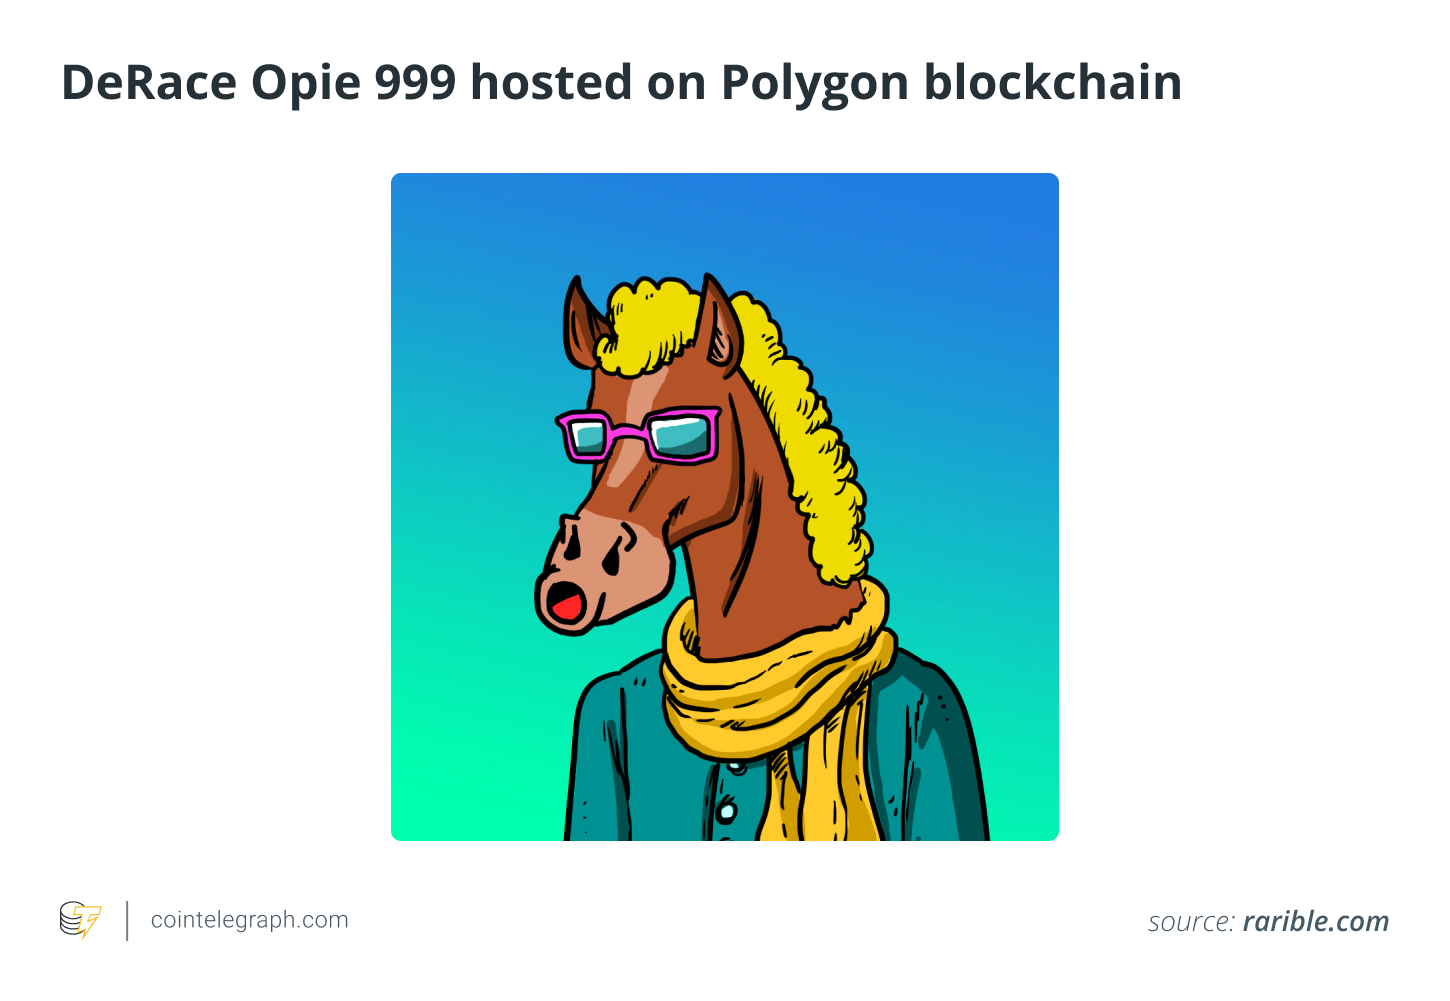 DeRace Opie 999 hosted on Polygon blockchain